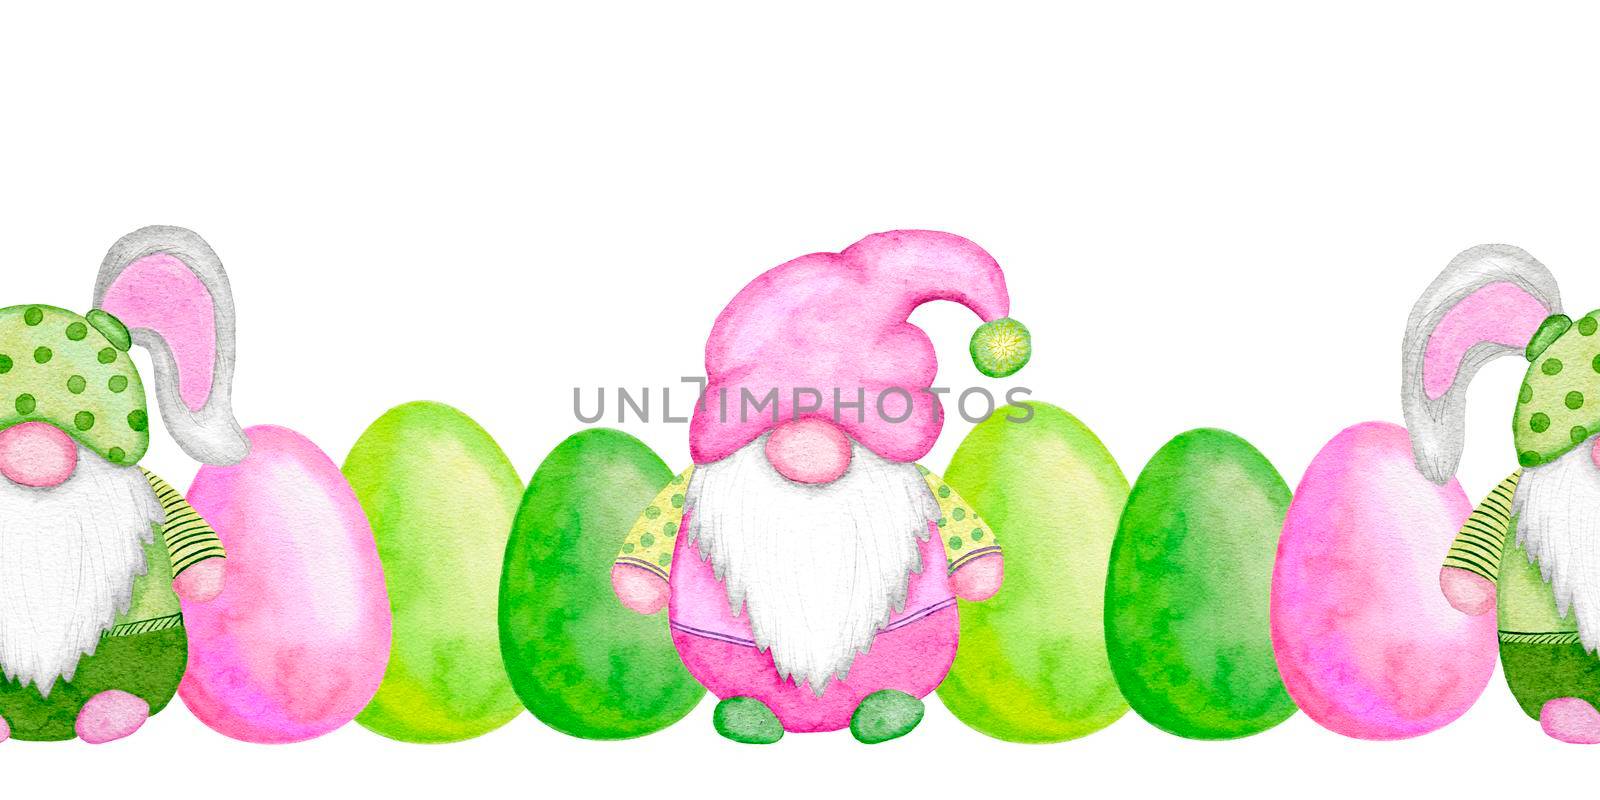 Seamless watercolor hand drawn horizontal borders with Easter eggs gnomes, green pink fuchsia rose flowers cartoon design. April spring print with bright funny elements for Easter cards invitations by Lagmar